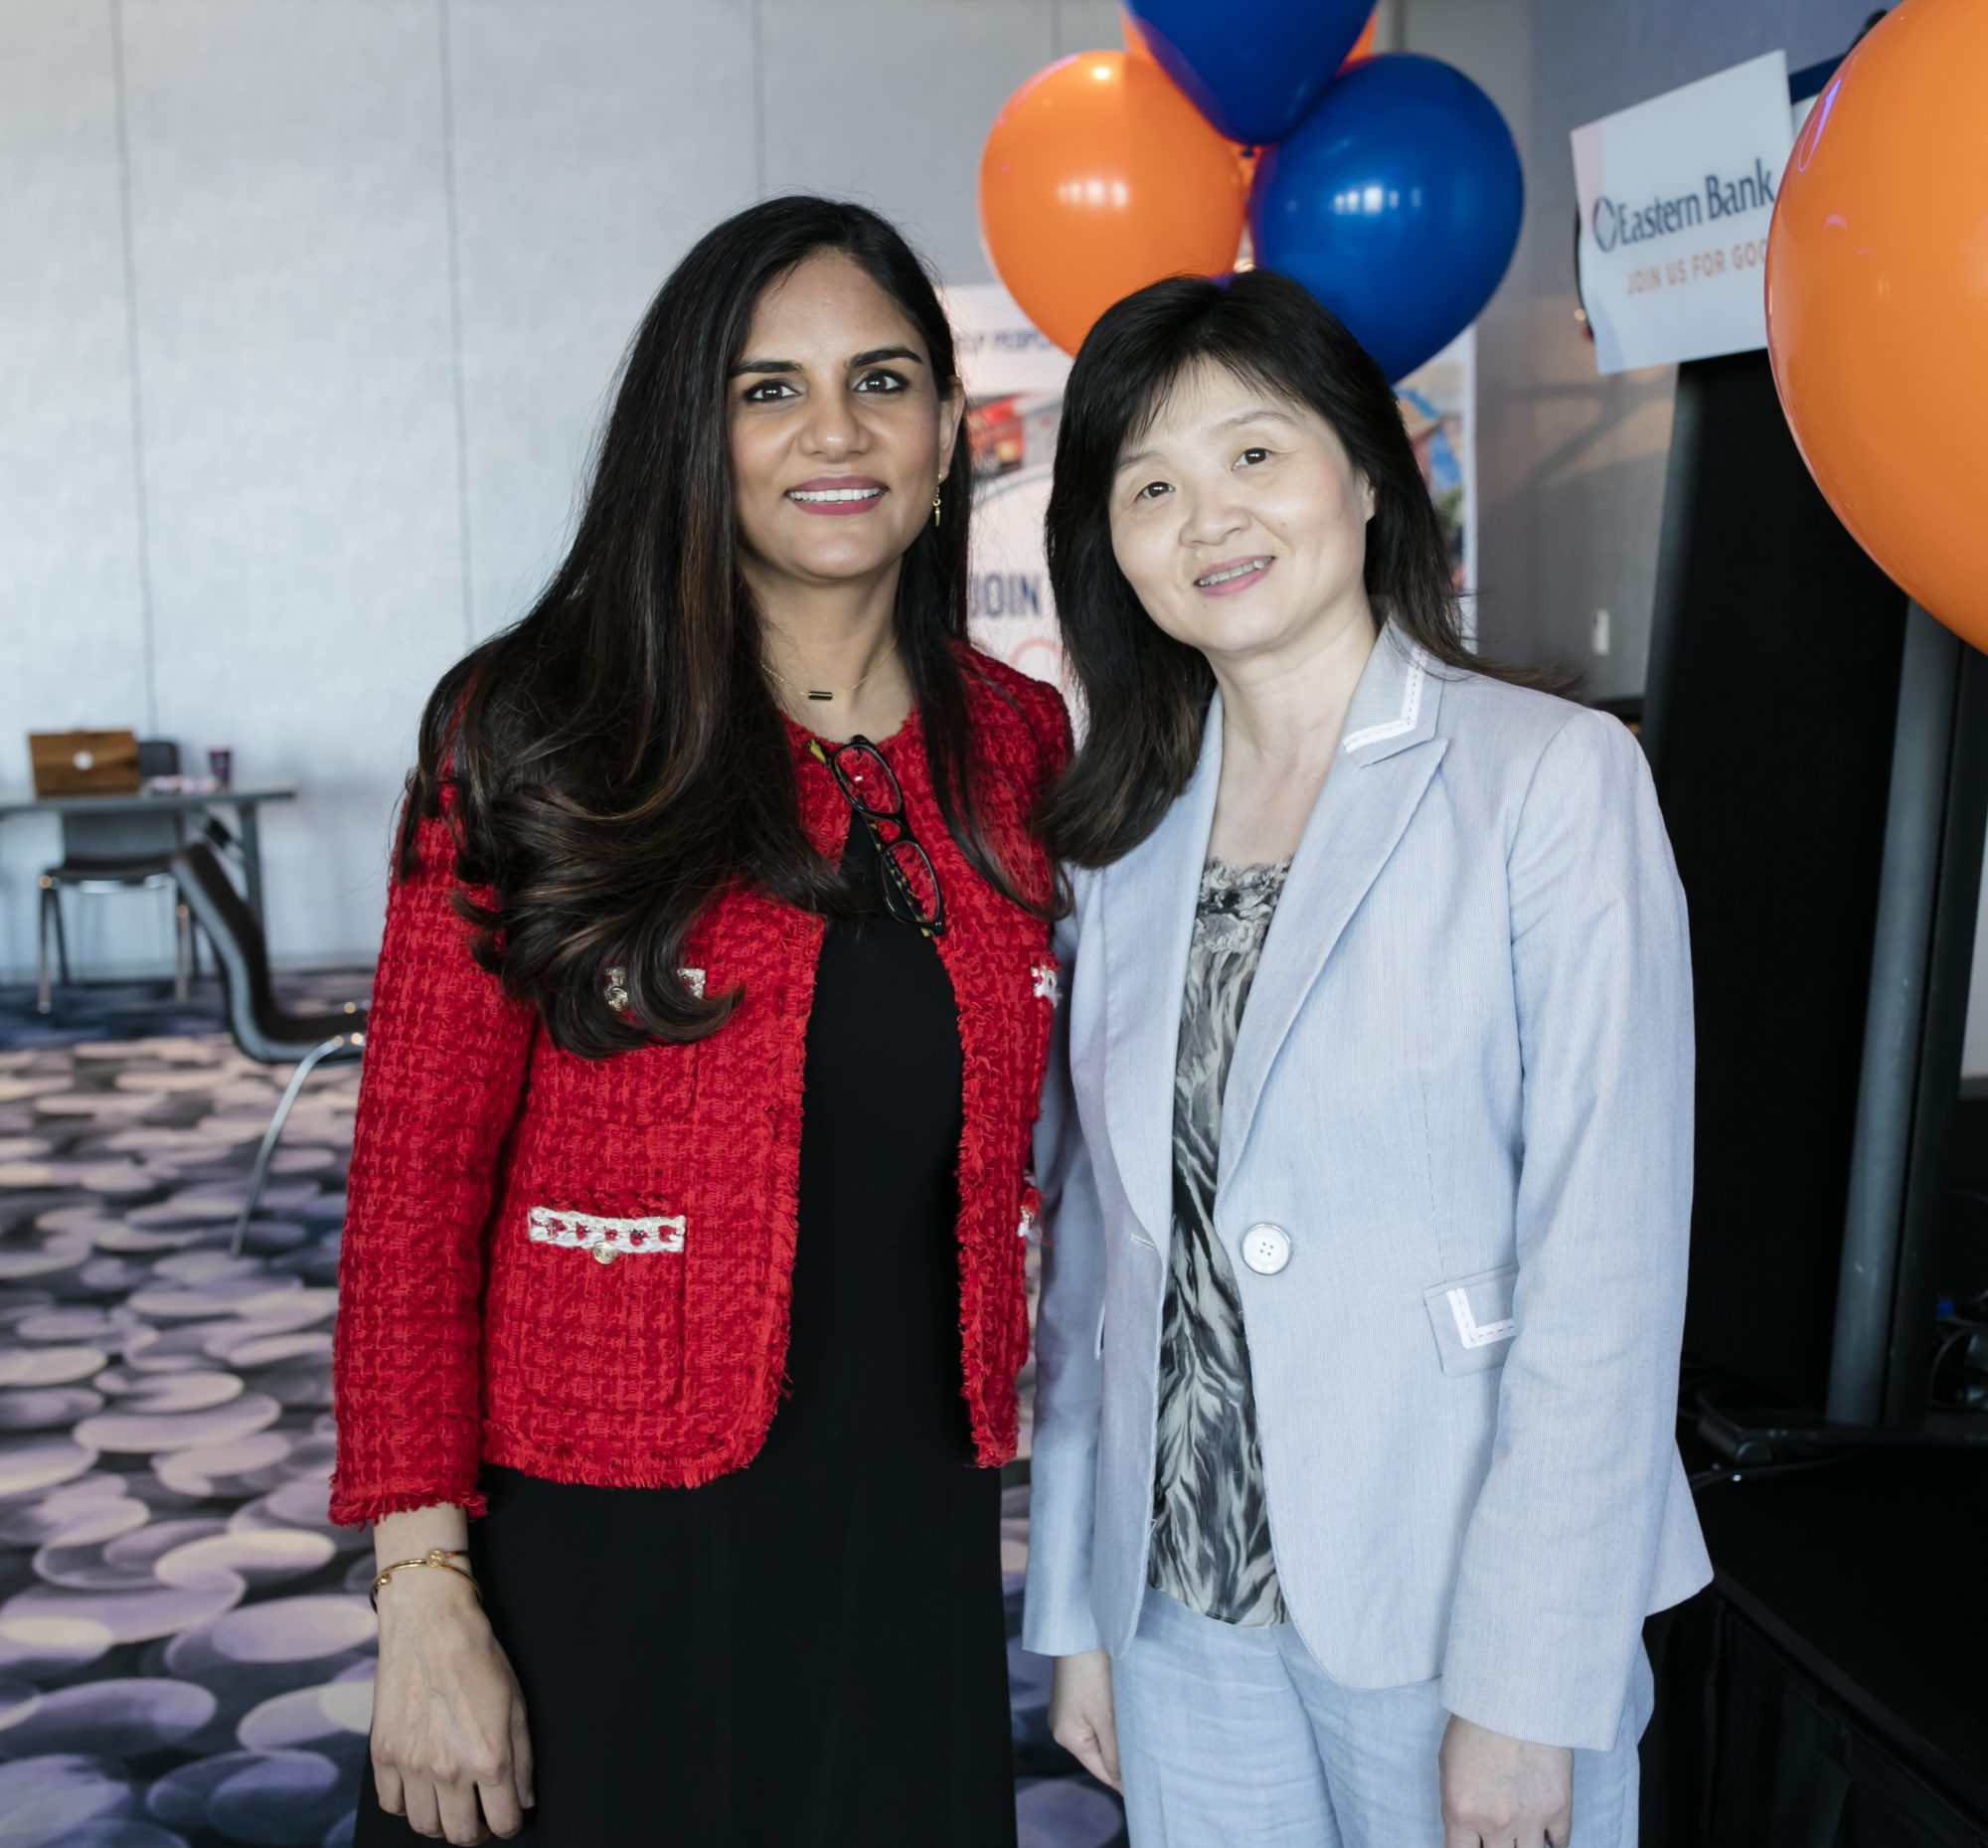 Sujata Yadav and Yongmei Chen attend the Eastern Bank event celebrating Asian-American women in business and public service in Massachusetts.